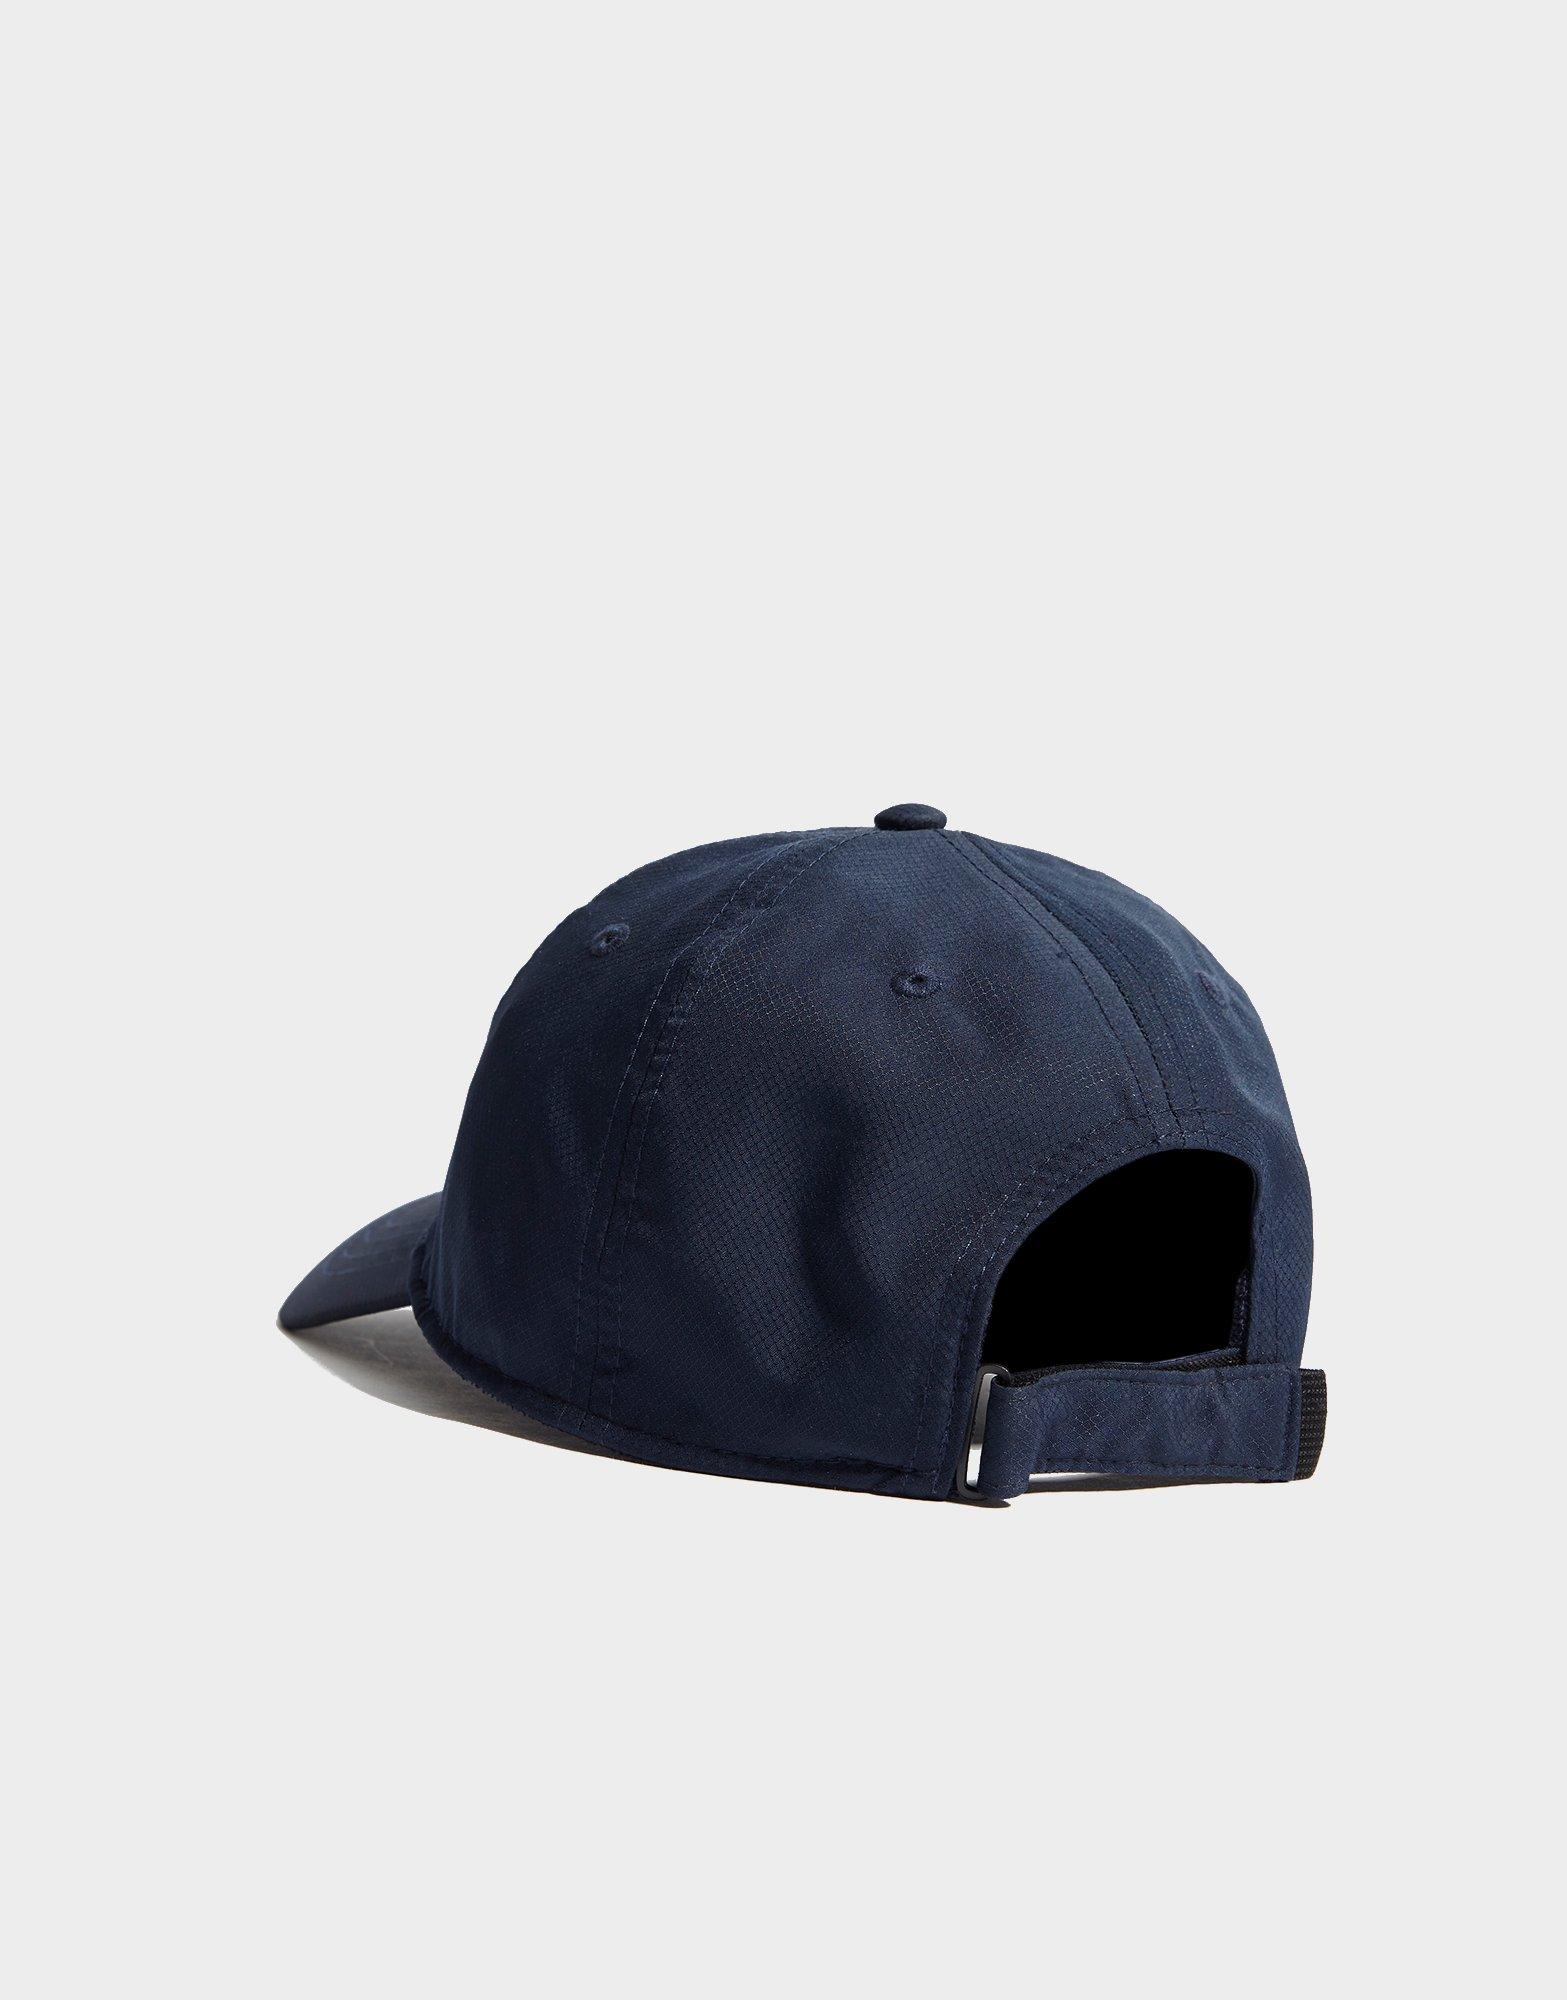 Lacoste Casquette Classic Blauw- JD Sports France